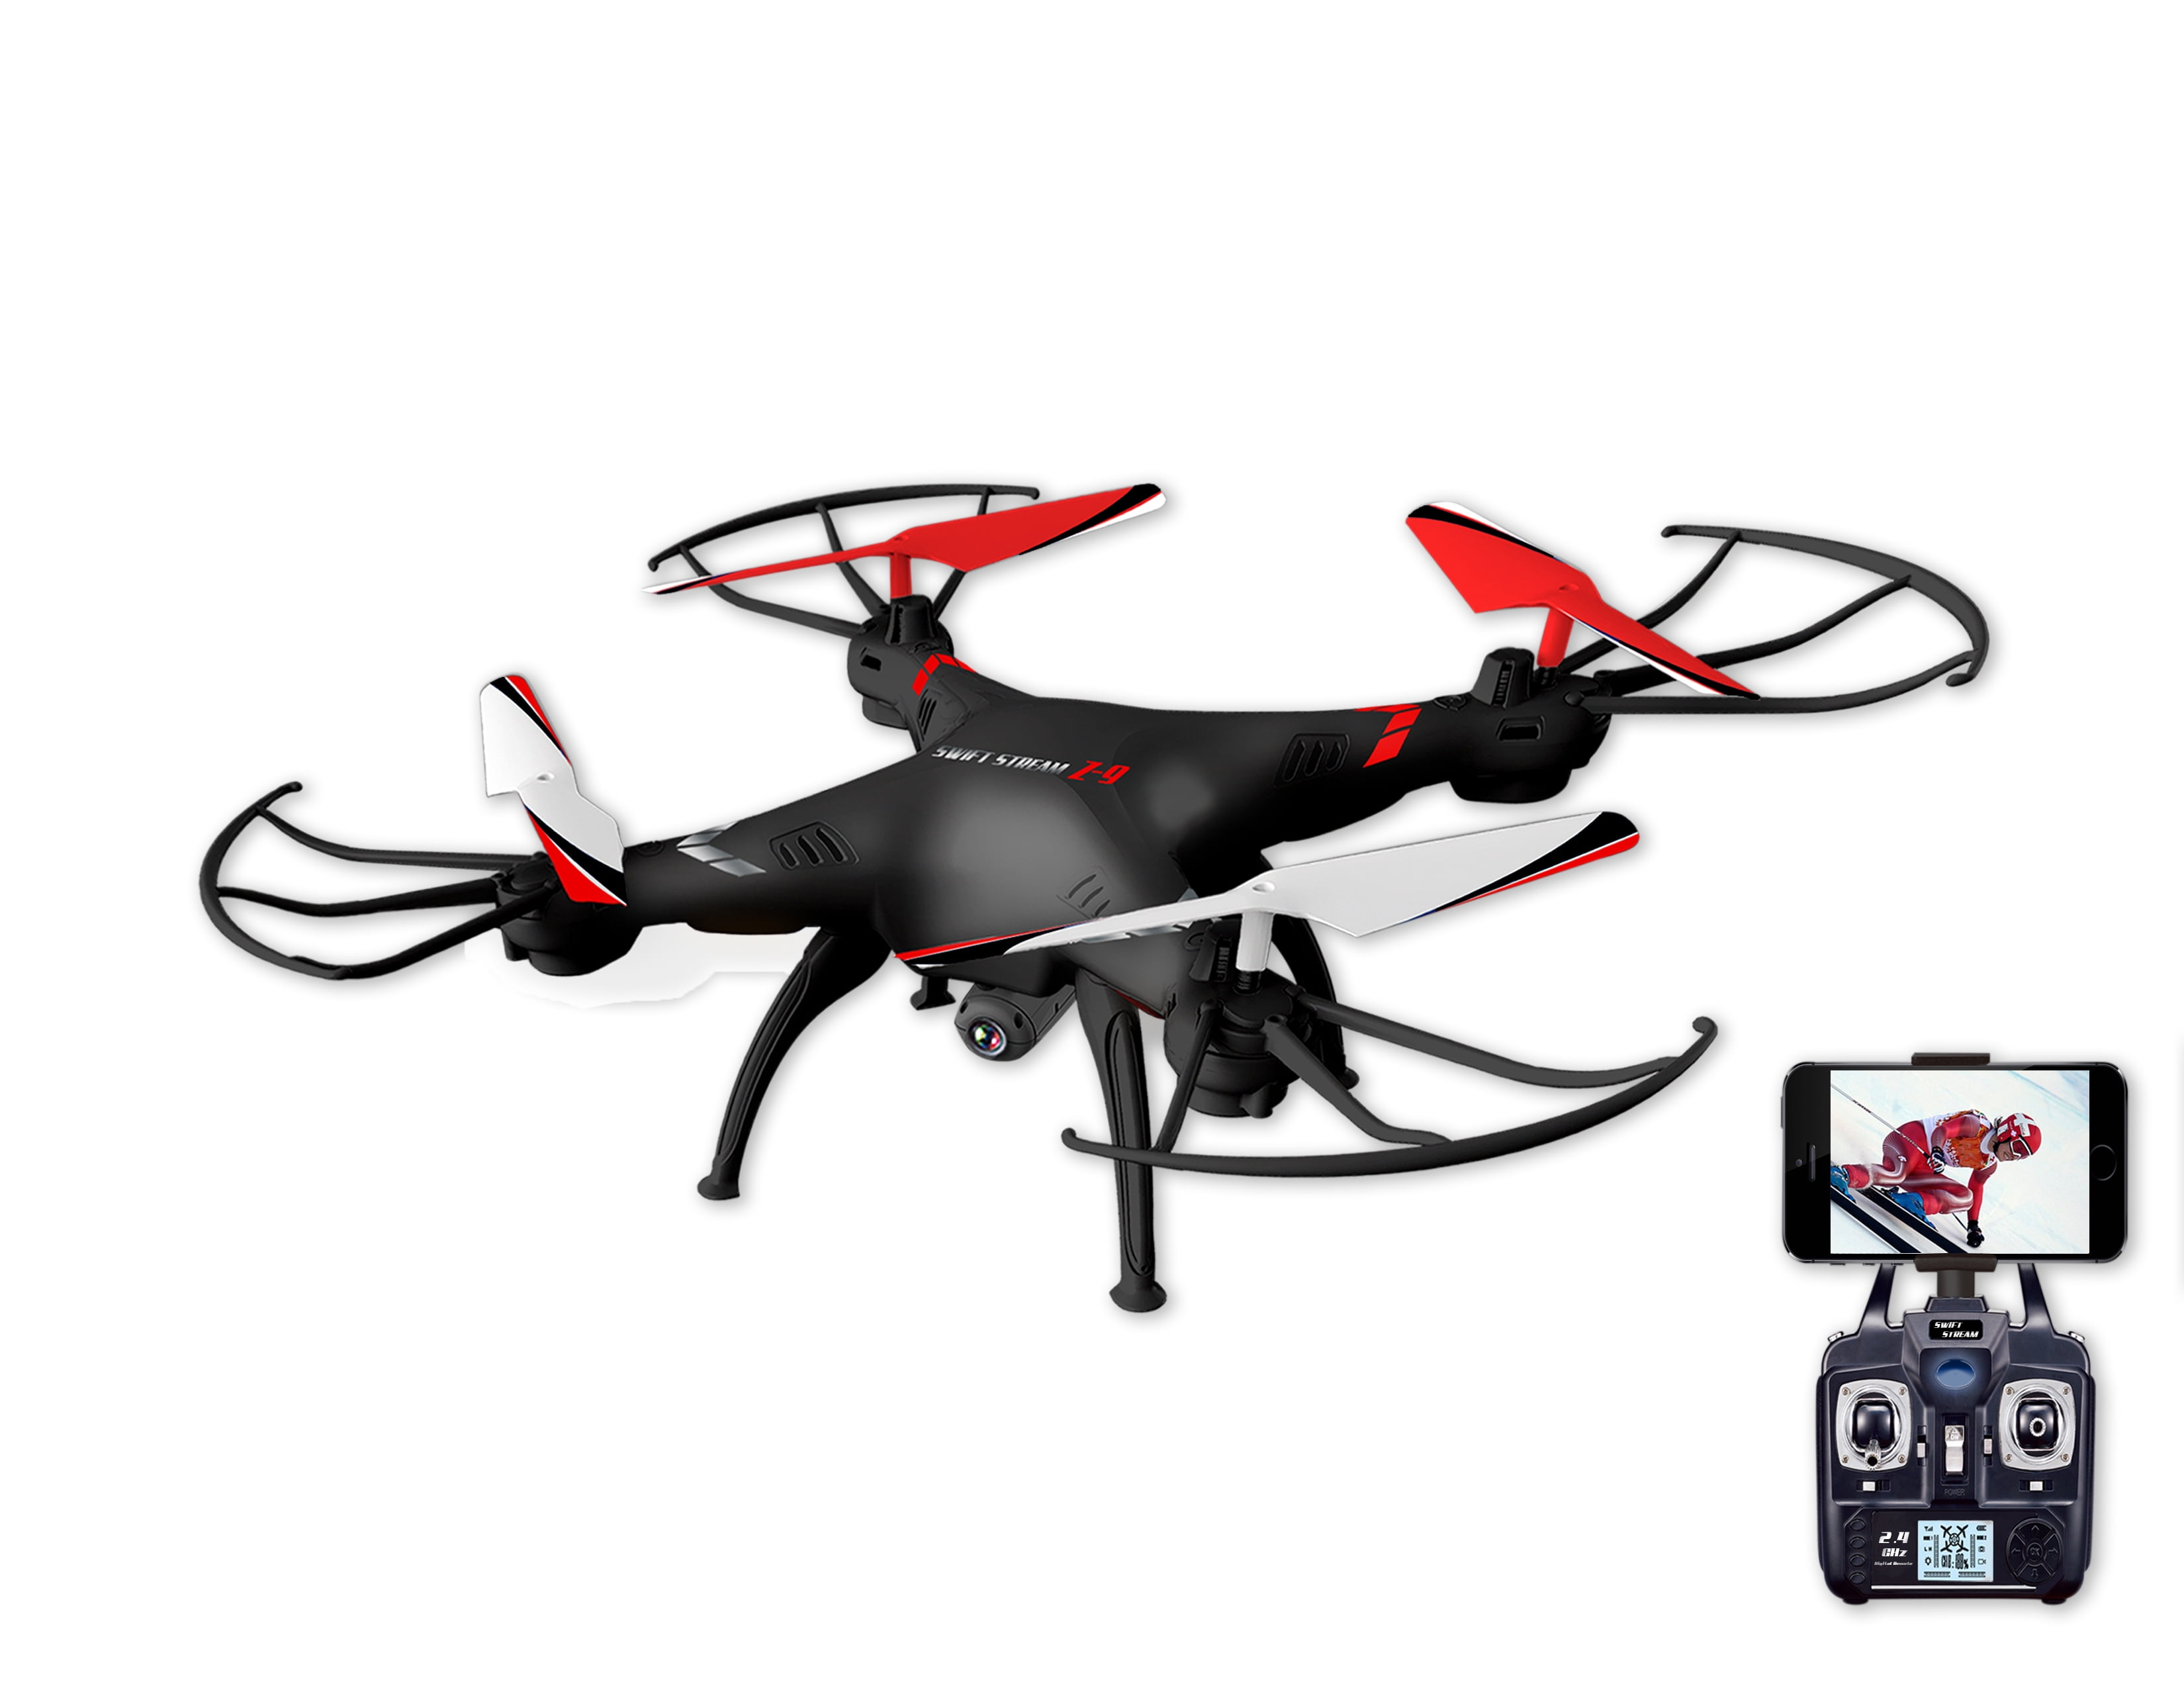 Fly The Best Swift Stream Z-9 Wi-Fi Camera Drone Indoor/Outdoor Smart Phone App 